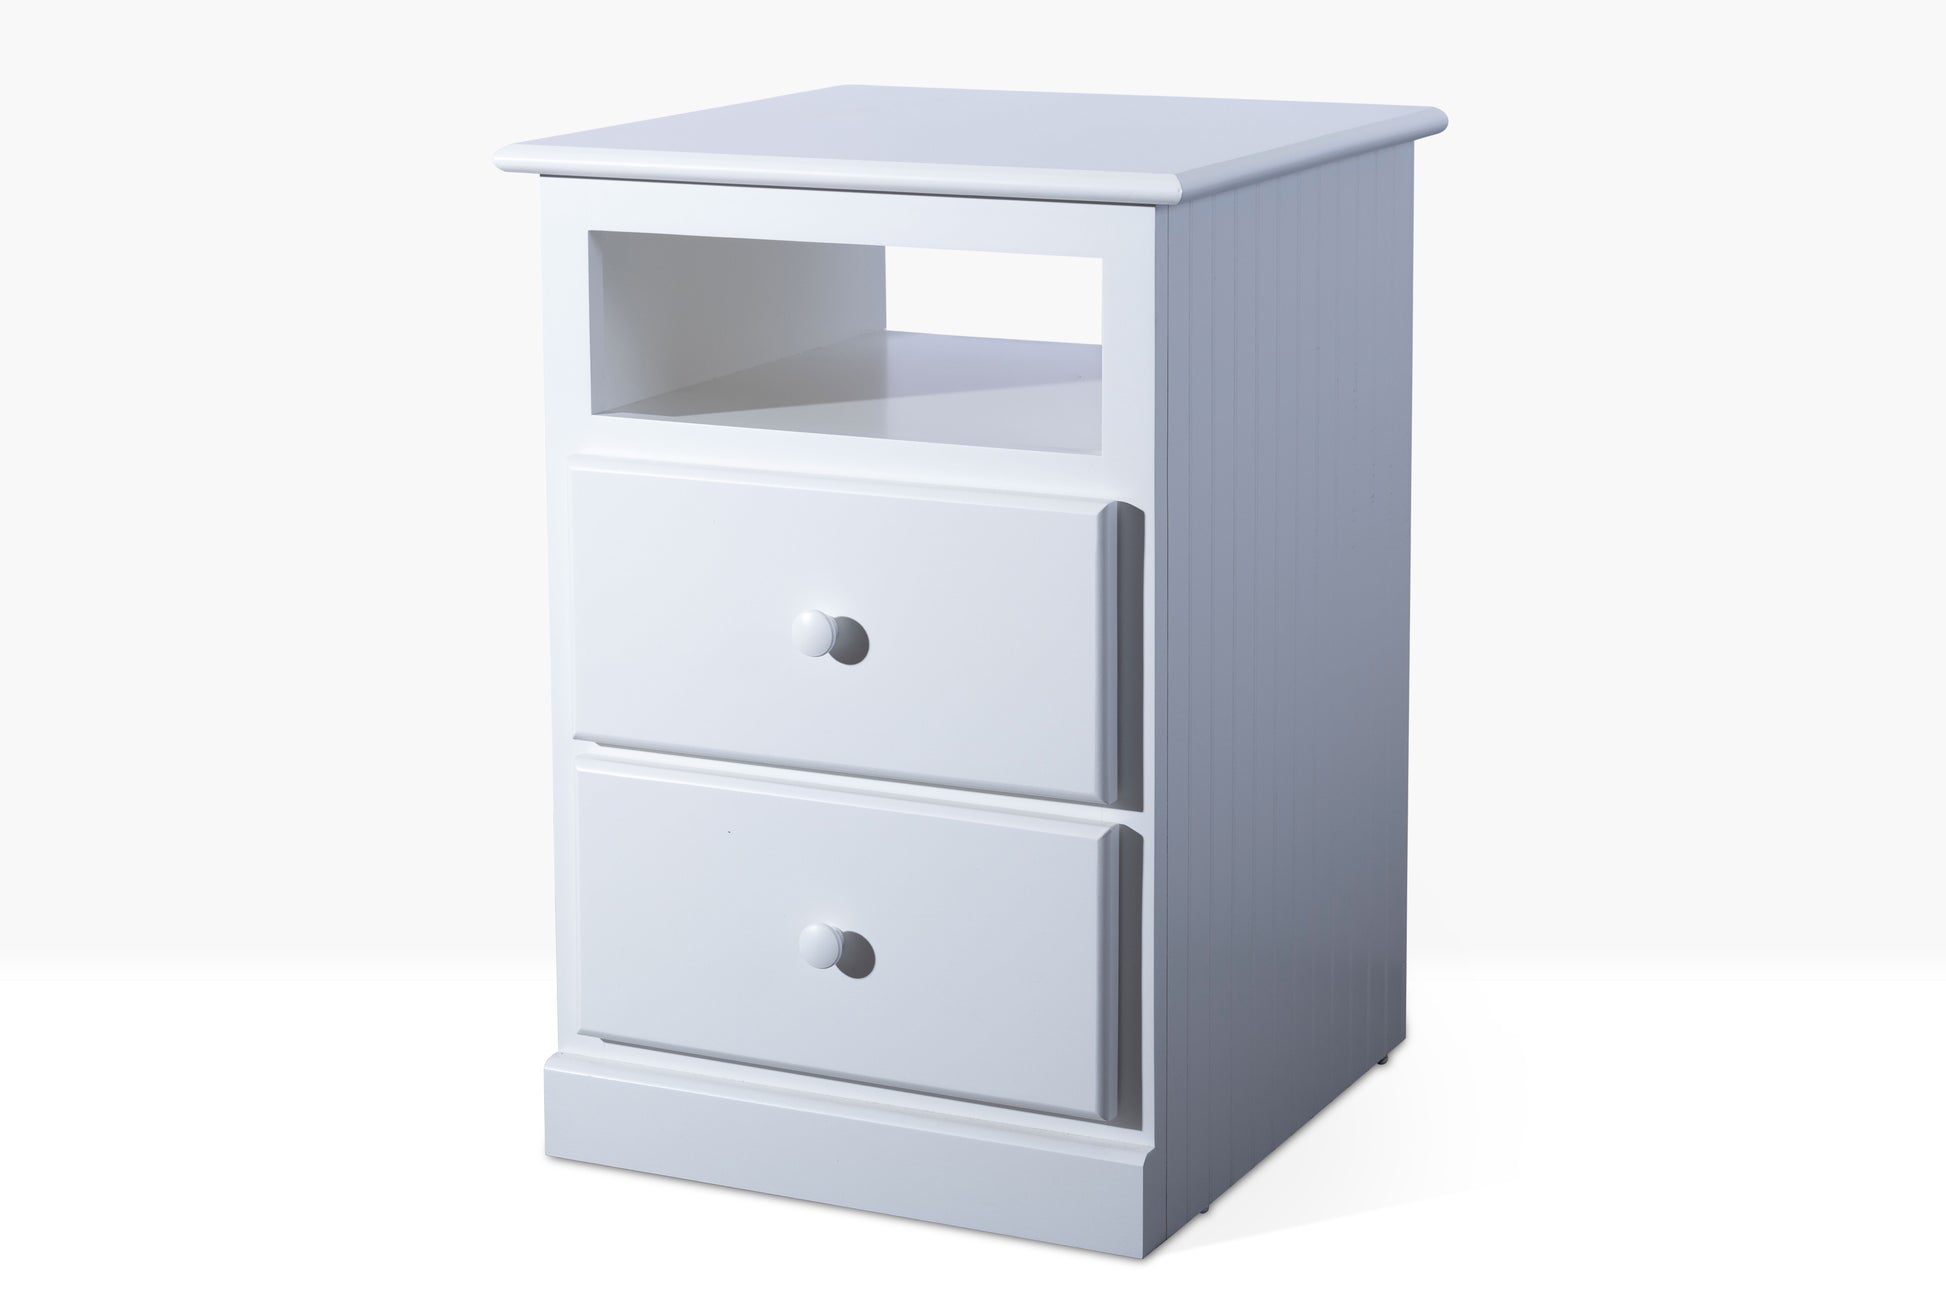 A birch nightstand with two drawers with full extension glides and a single cubby space. It has bead board sides, and is shown in white. Pictured from front angle.